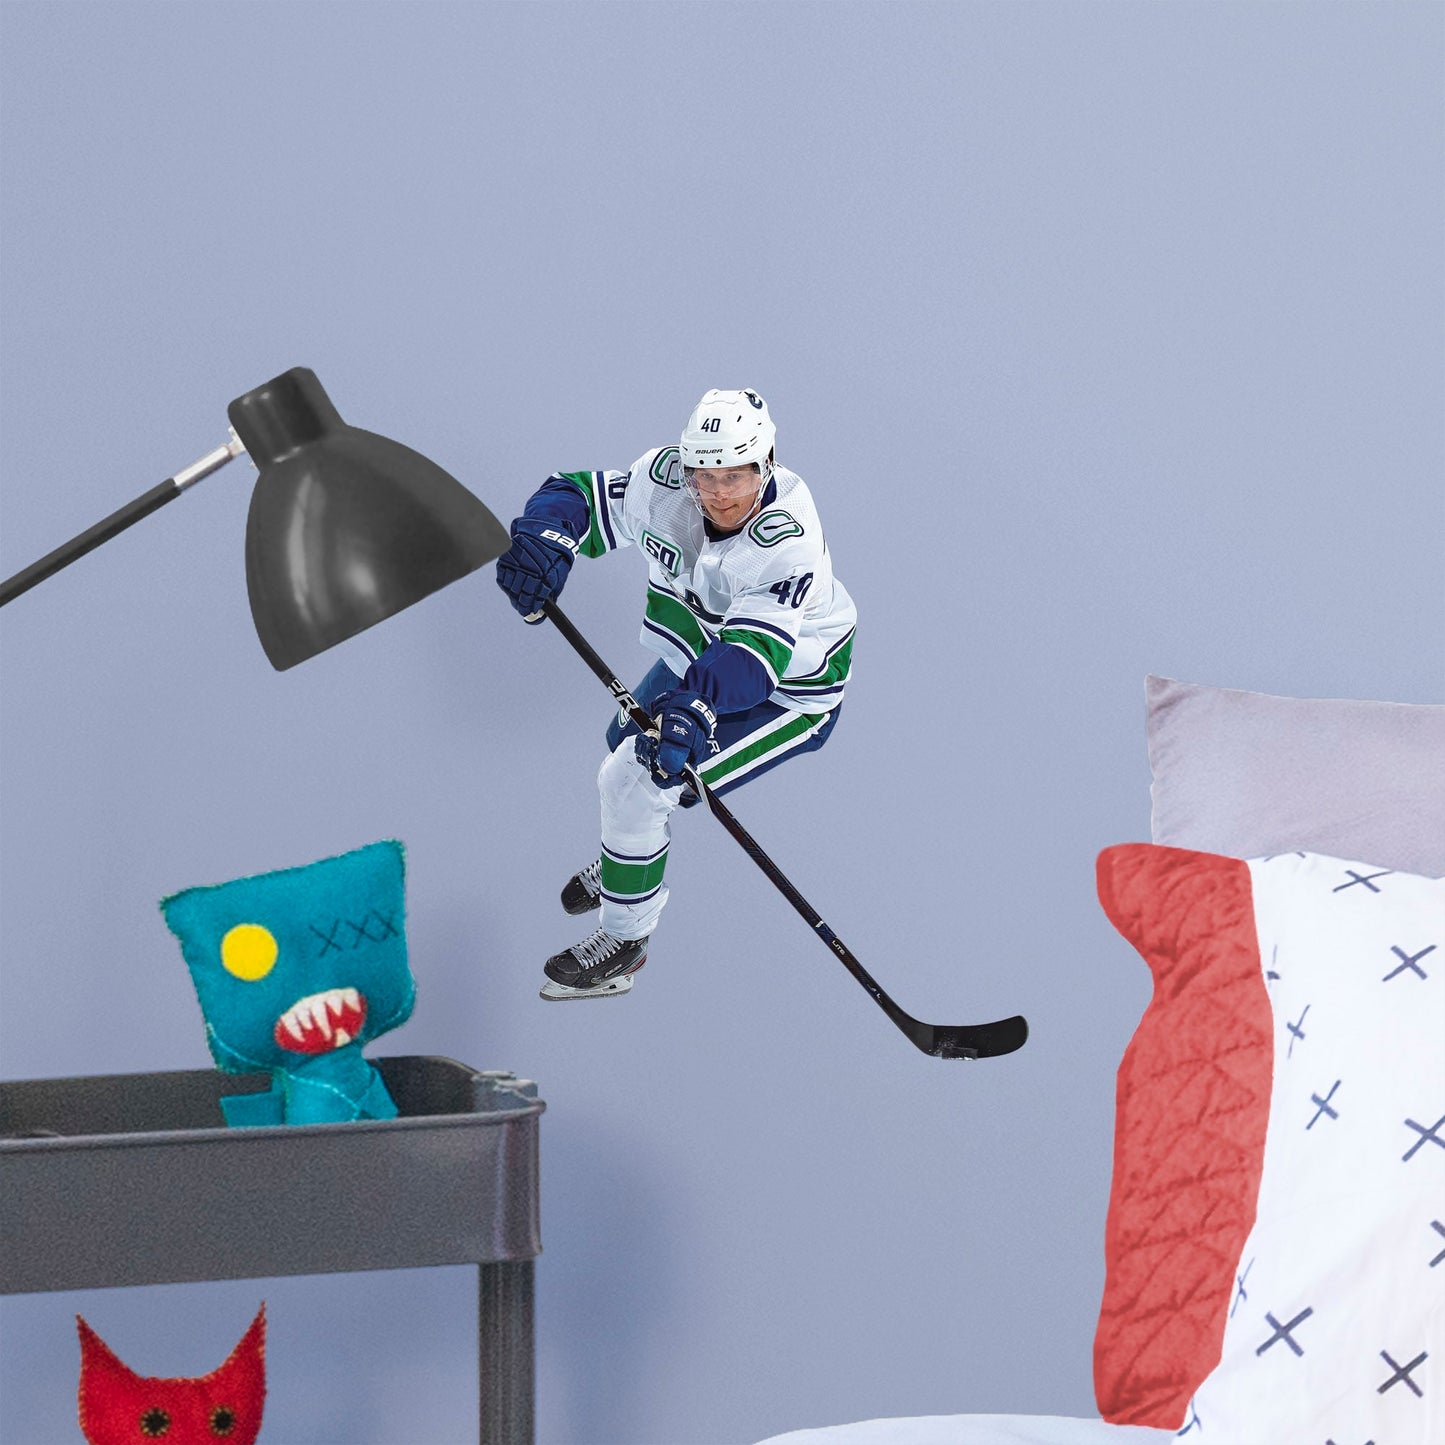 Large Athlete + 2 Decals (14"W x 16"H) Elias Peterson has been a standout in the league since the very beginning, and now you can bring him to life in your own home with this Officially Licensed NHL Removable Wall Decal! Canucks fans and NHL fanatics alike will love this durable and high quality wall decal and, with the excitement it brings to your space, it's almost as good as being at Rogers Arena!